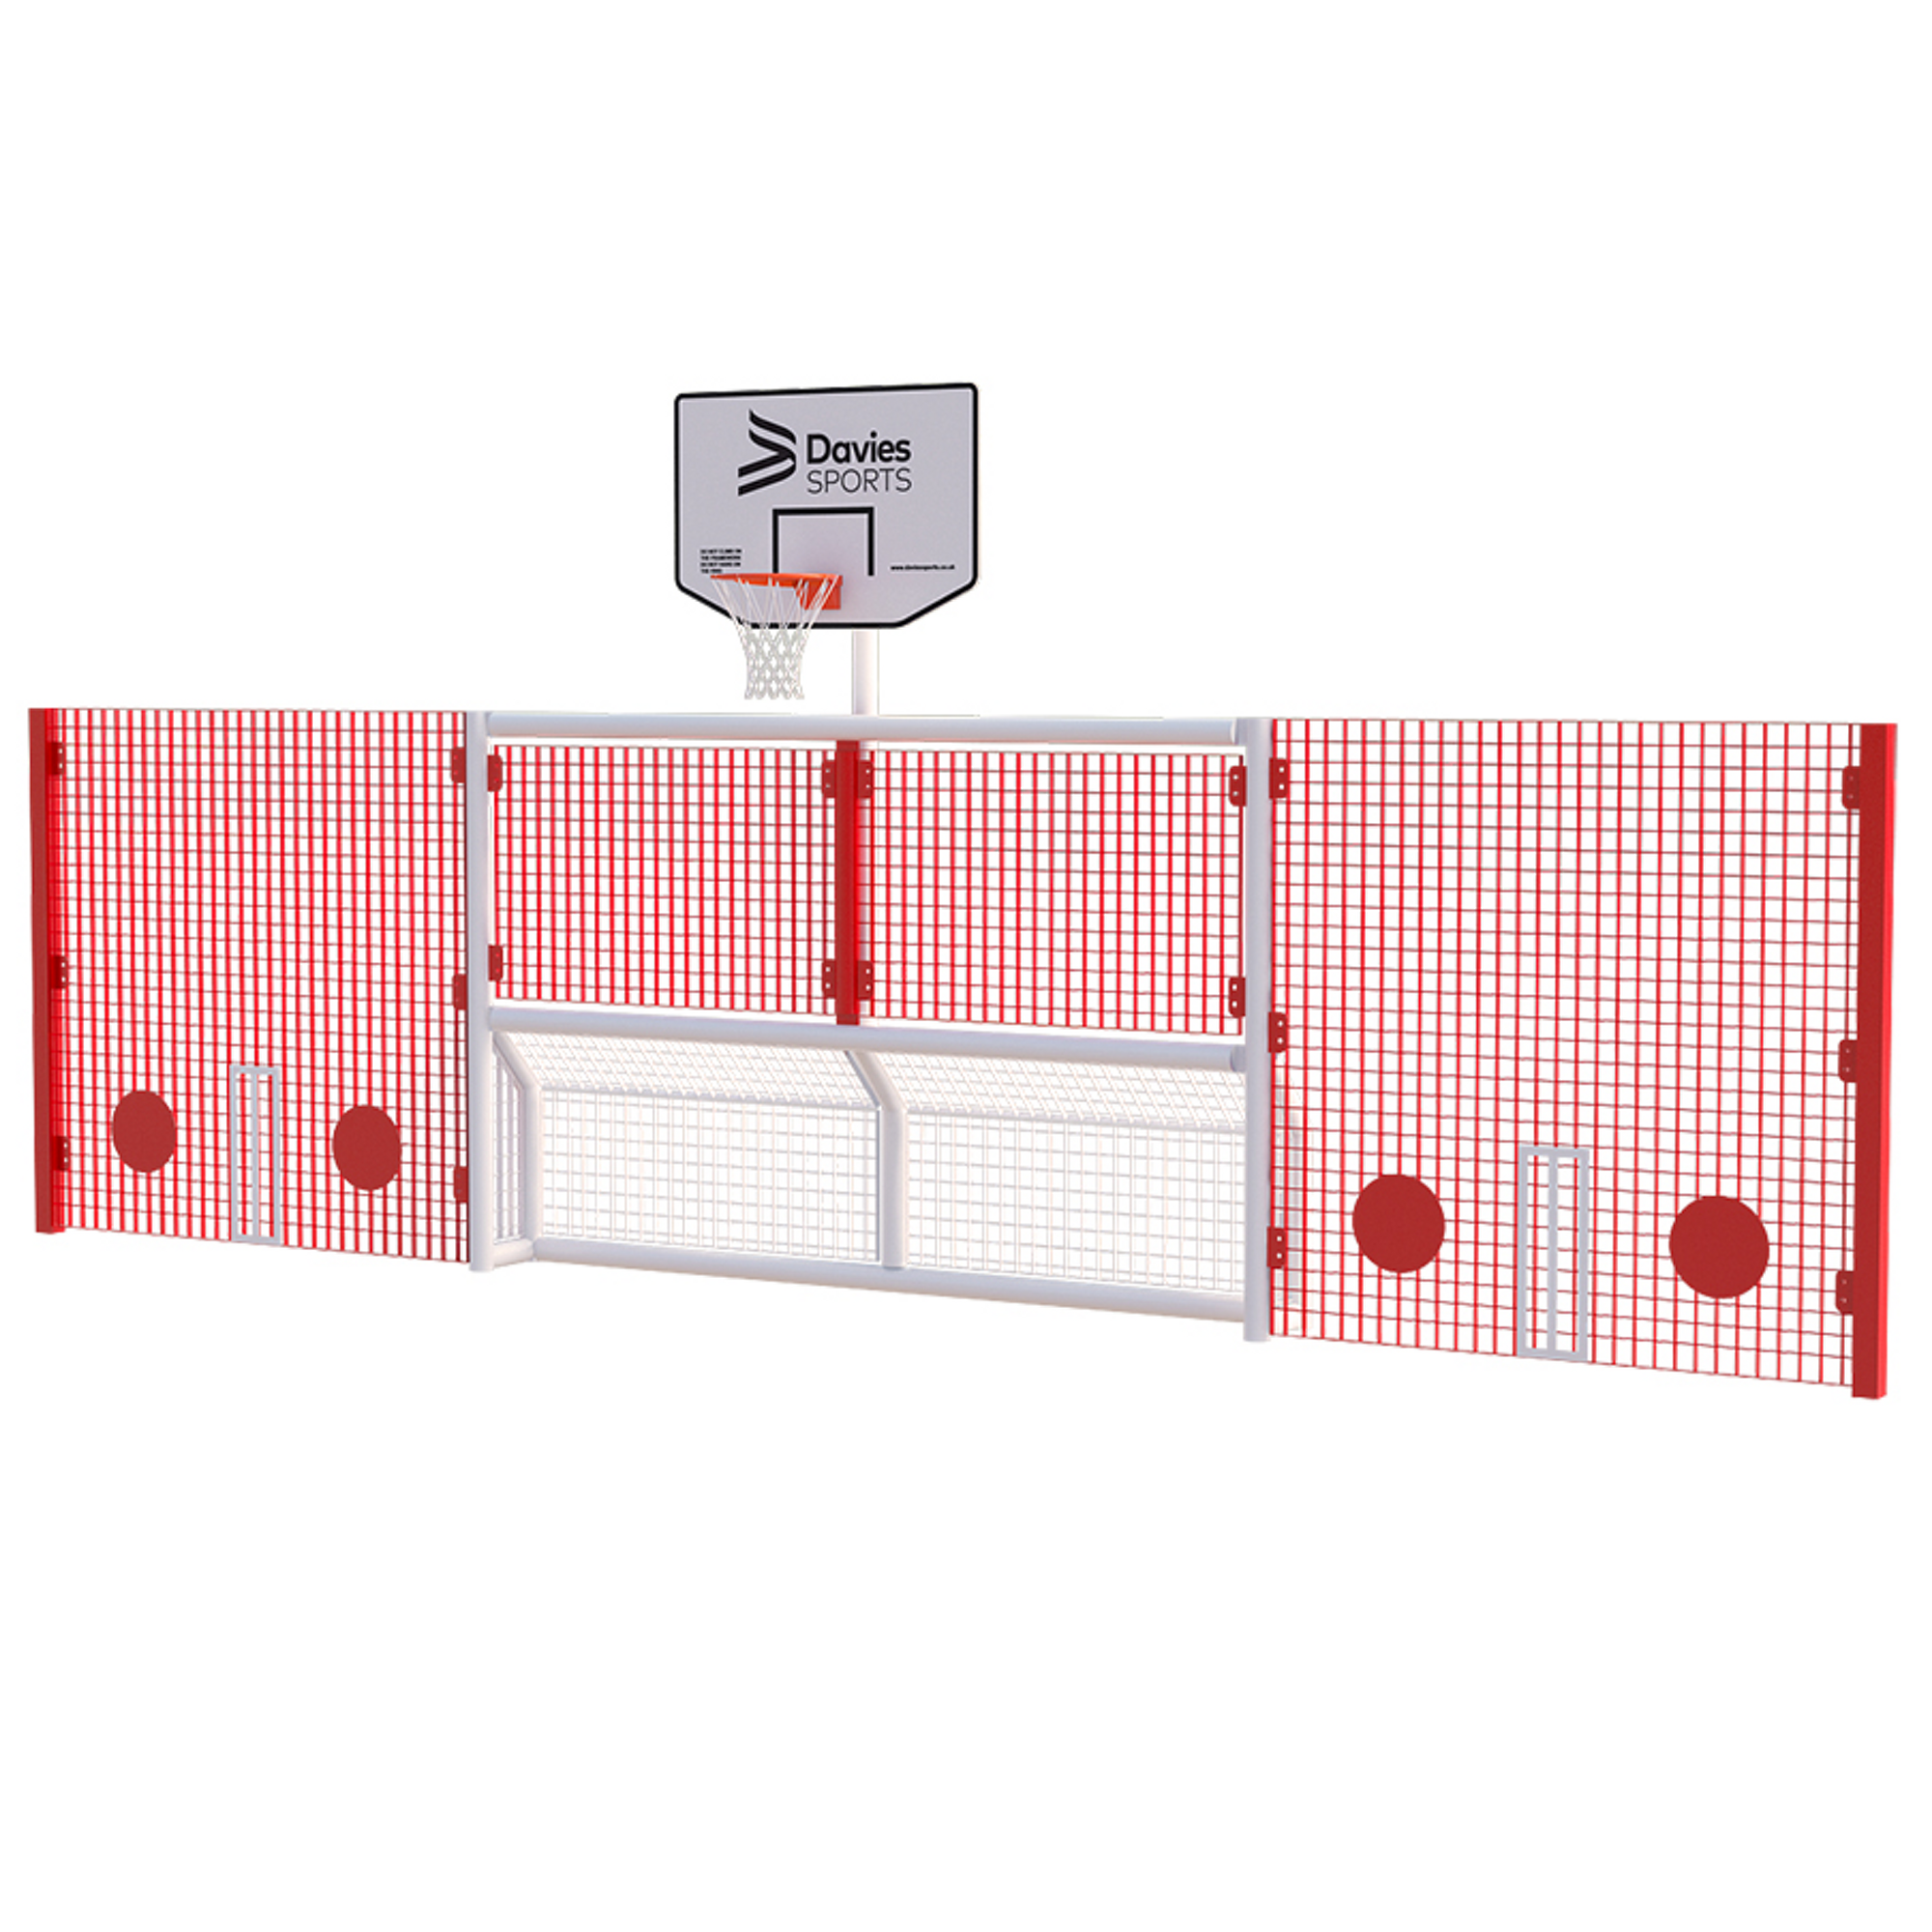 Primary High Sides Bball Wht Frame Red